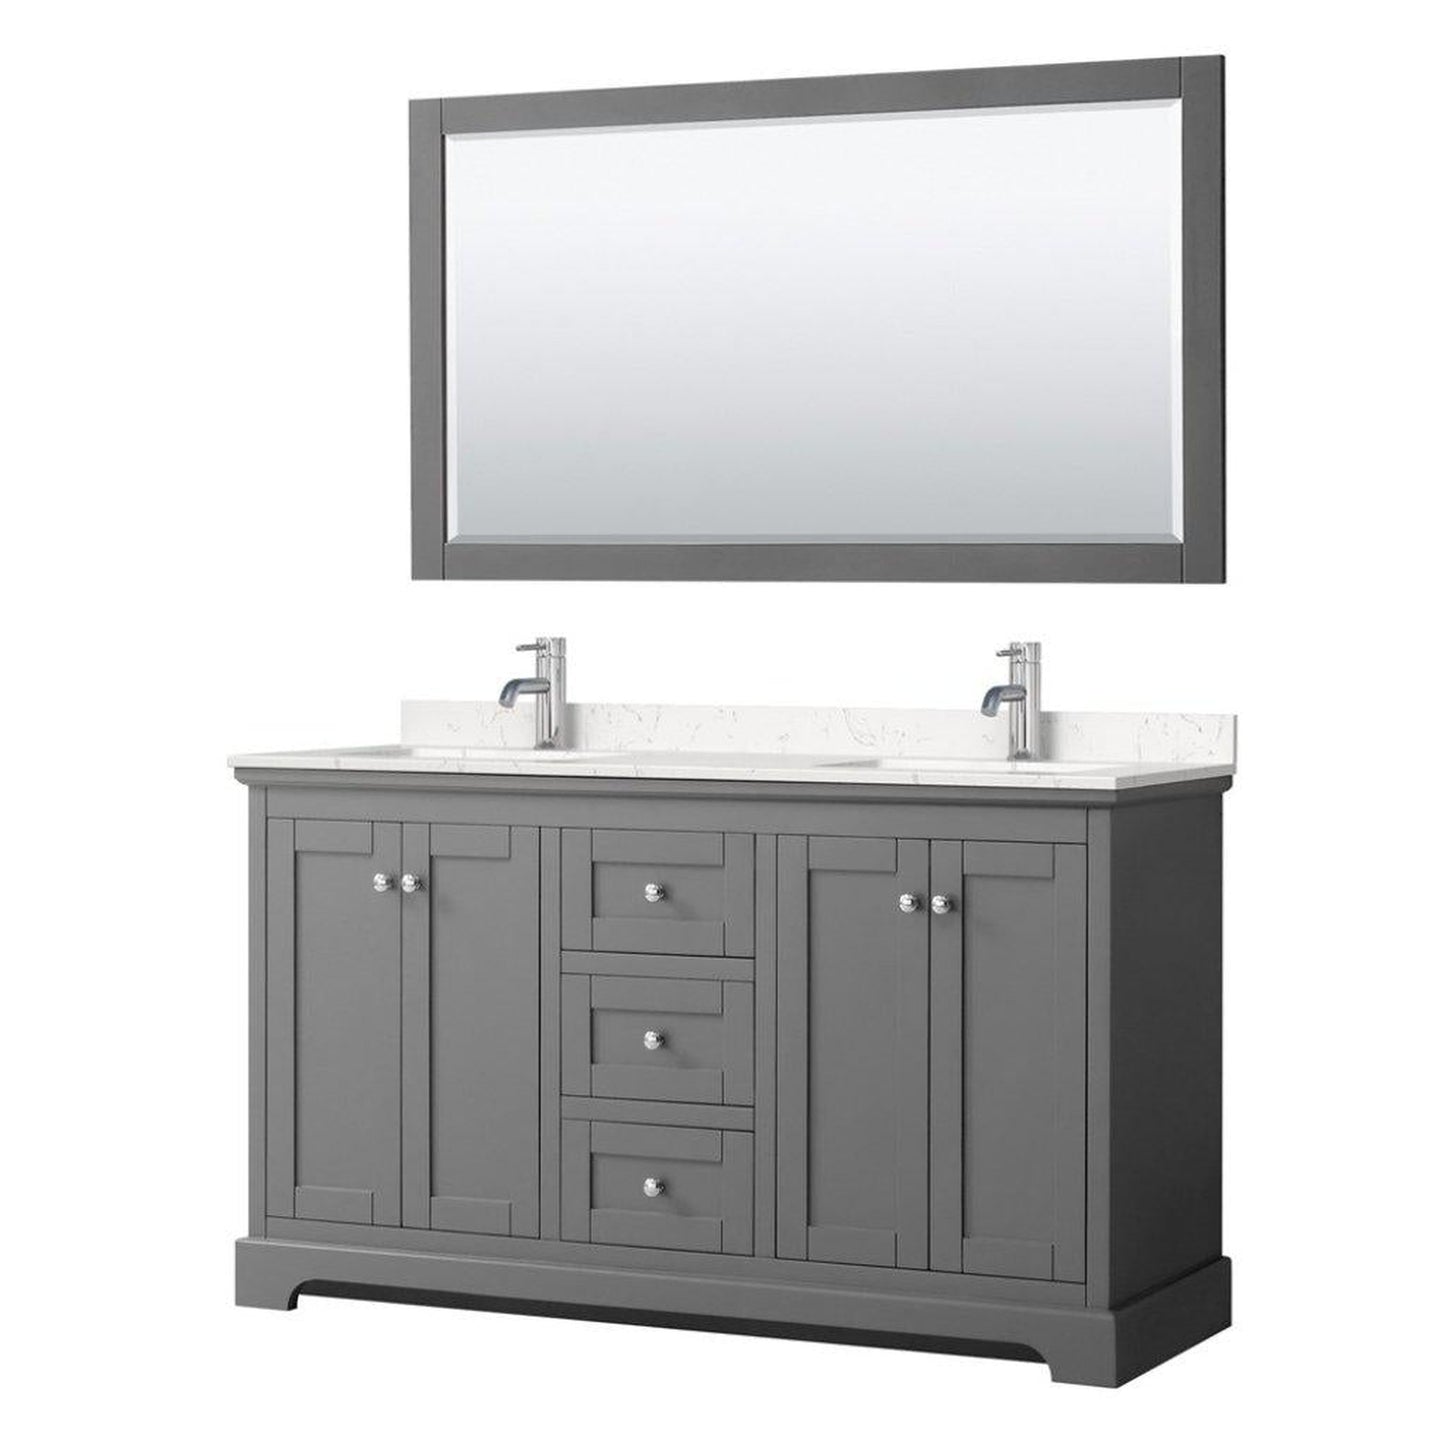 Wyndham Collection Avery 60" Dark Gray Double Bathroom Vanity Set With Light-Vein Cultured Marble Countertop With 1-Hole Faucet And Square Sink And 58" Mirror